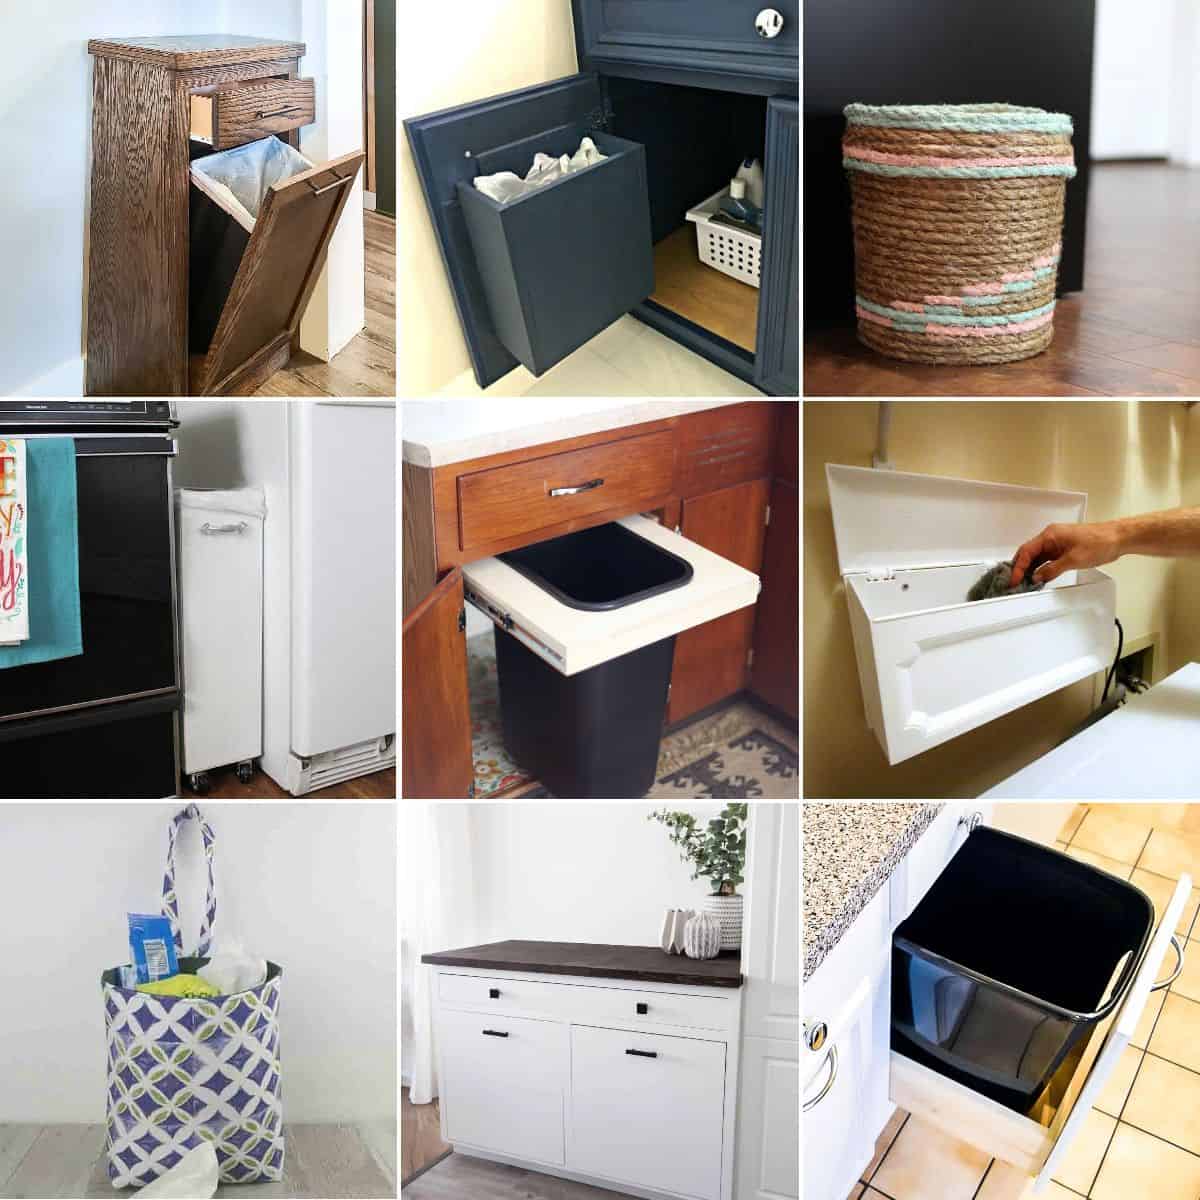 How to Build a Large Bin for Trash DIY